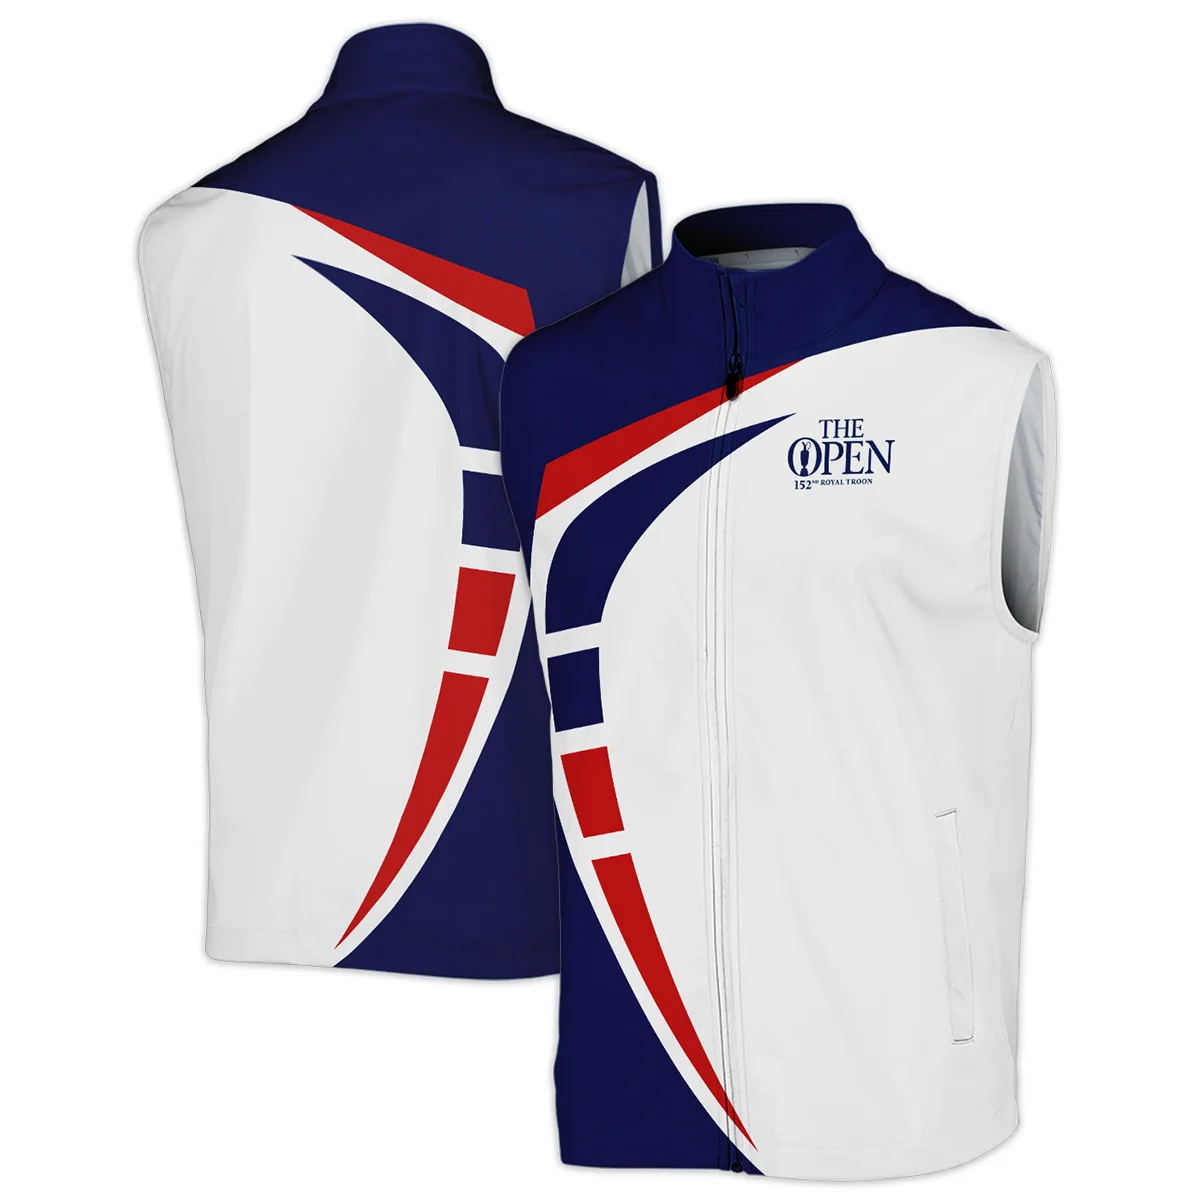 152nd Open Championship Callaway White Blue Red Pattern Background Quarter-Zip Jacket All Over Prints HOTOP270624A03CLWSWZ